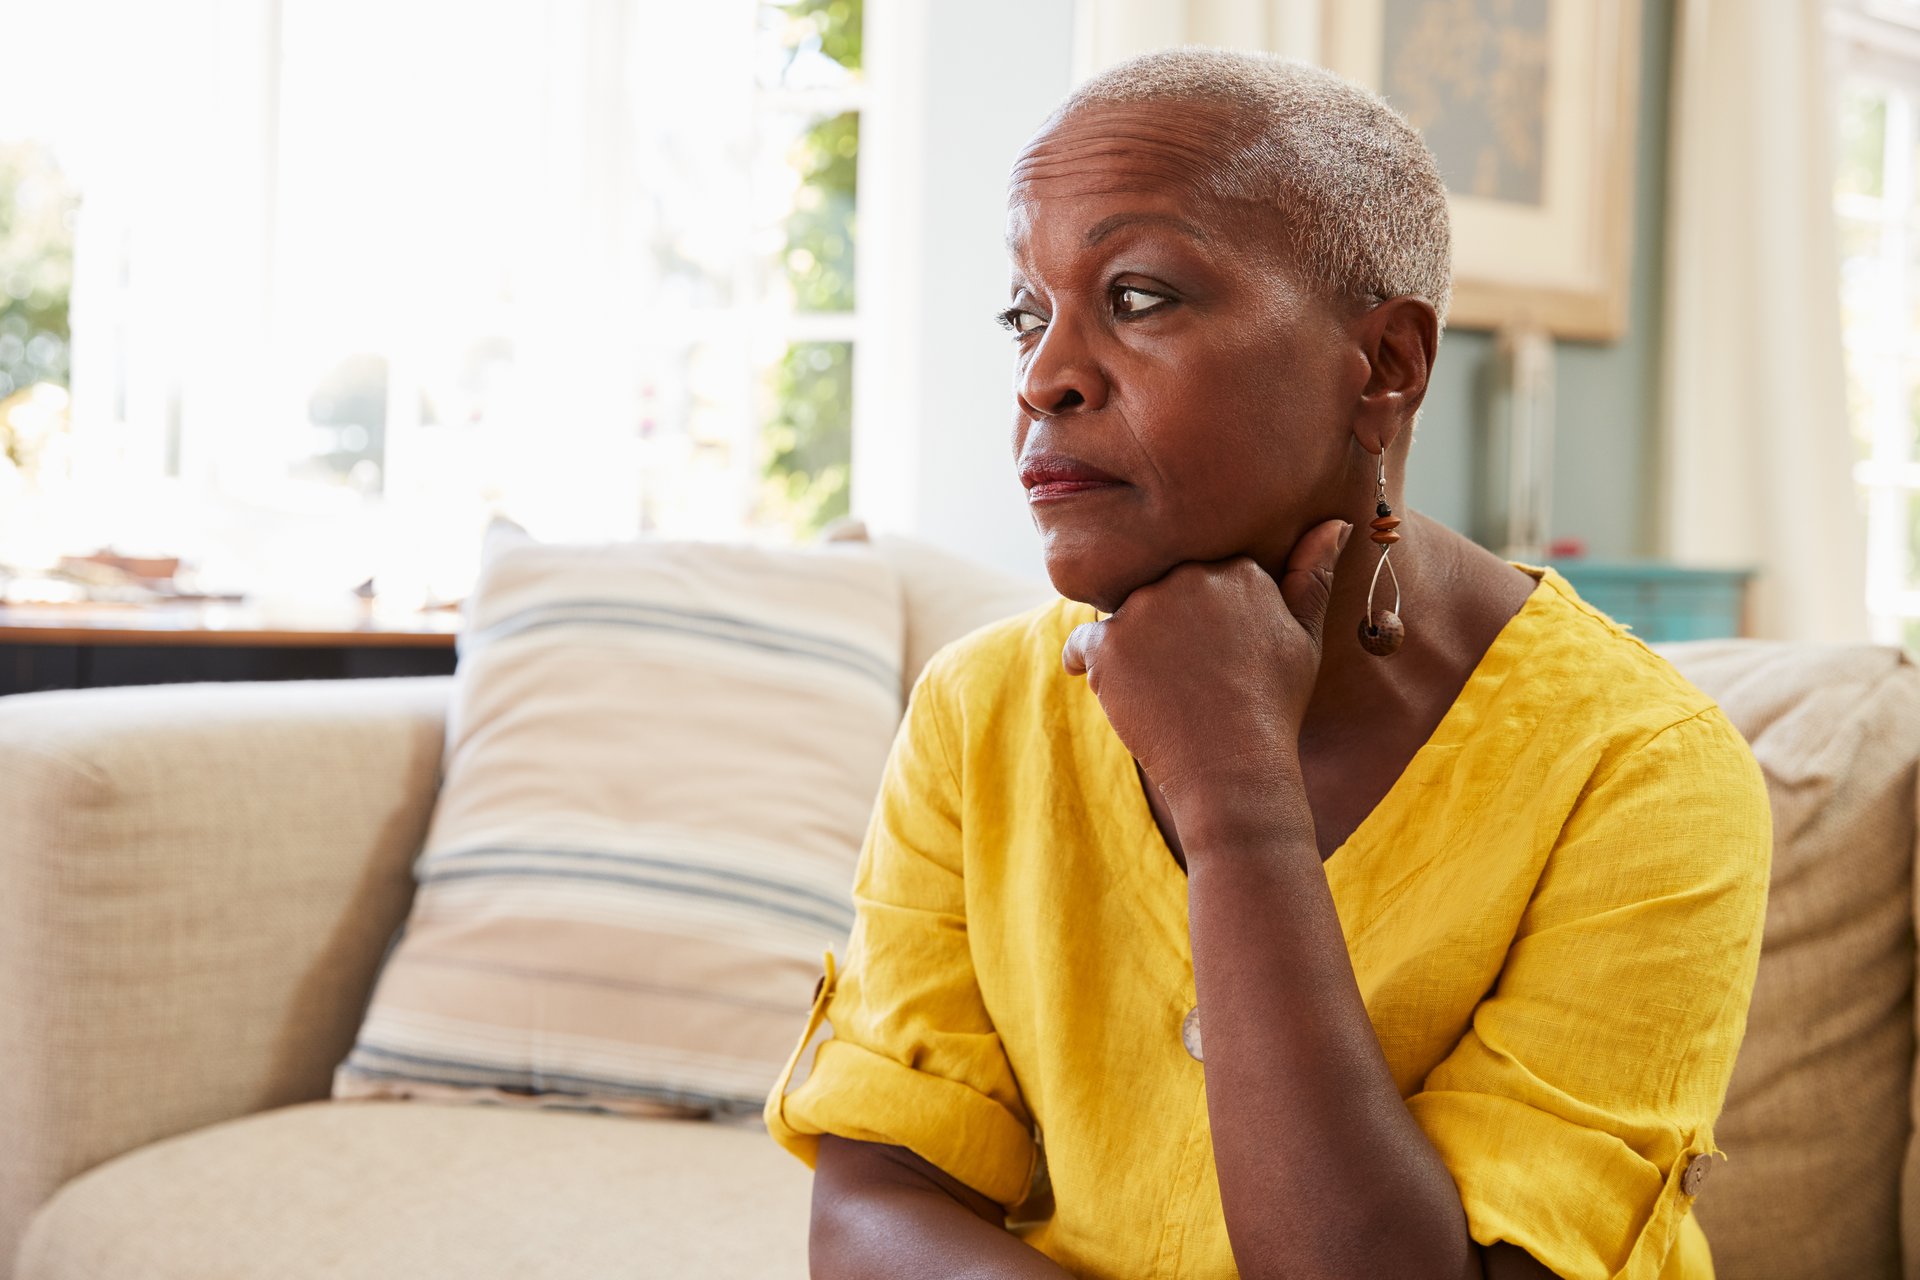 A worried senior black woman sits on her couch